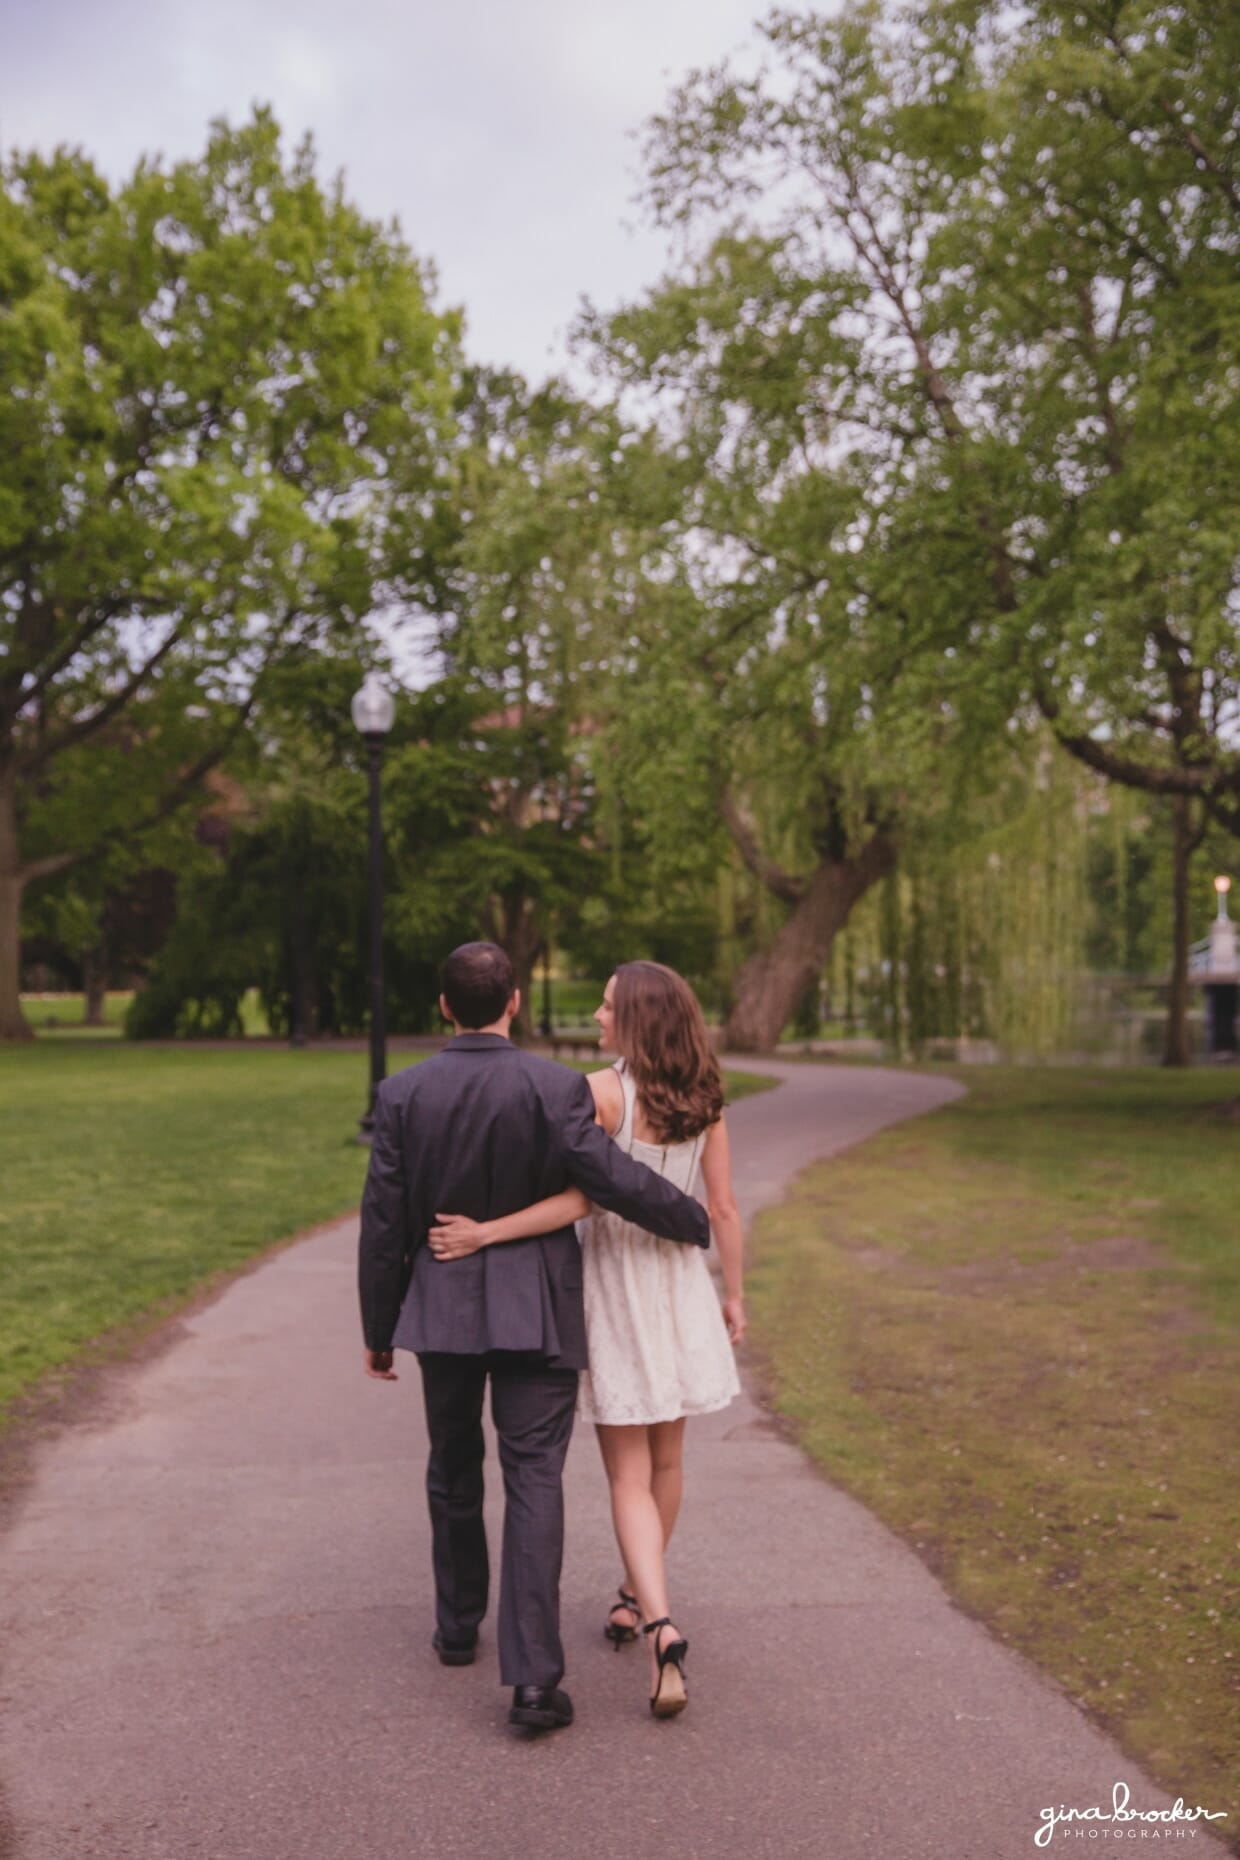 A couple walk together through the Boston Public Gardens during their sweet springtime engagement session